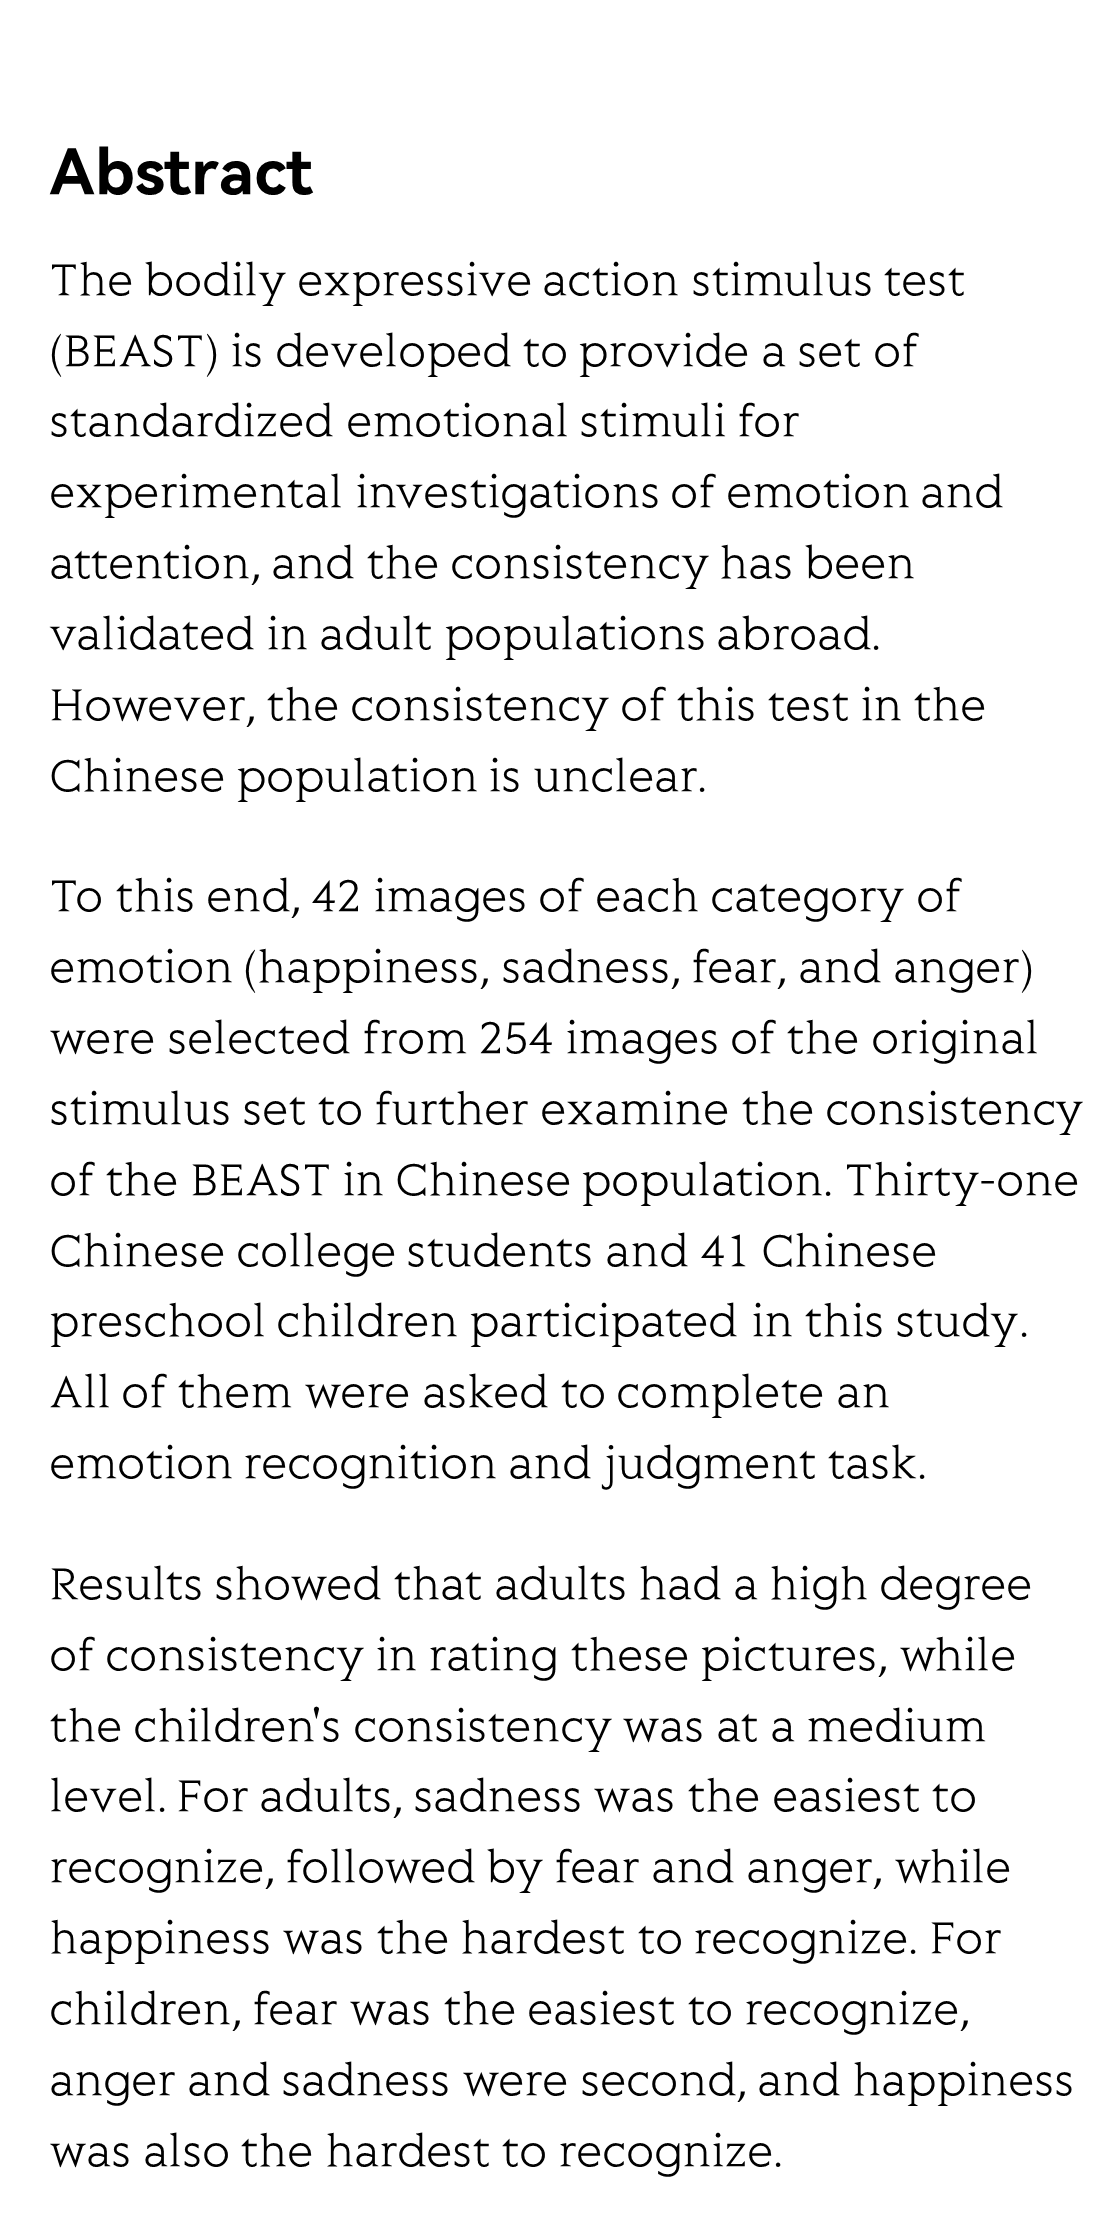 Validation of the bodily expressive action stimulus test among Chinese adults and children_2